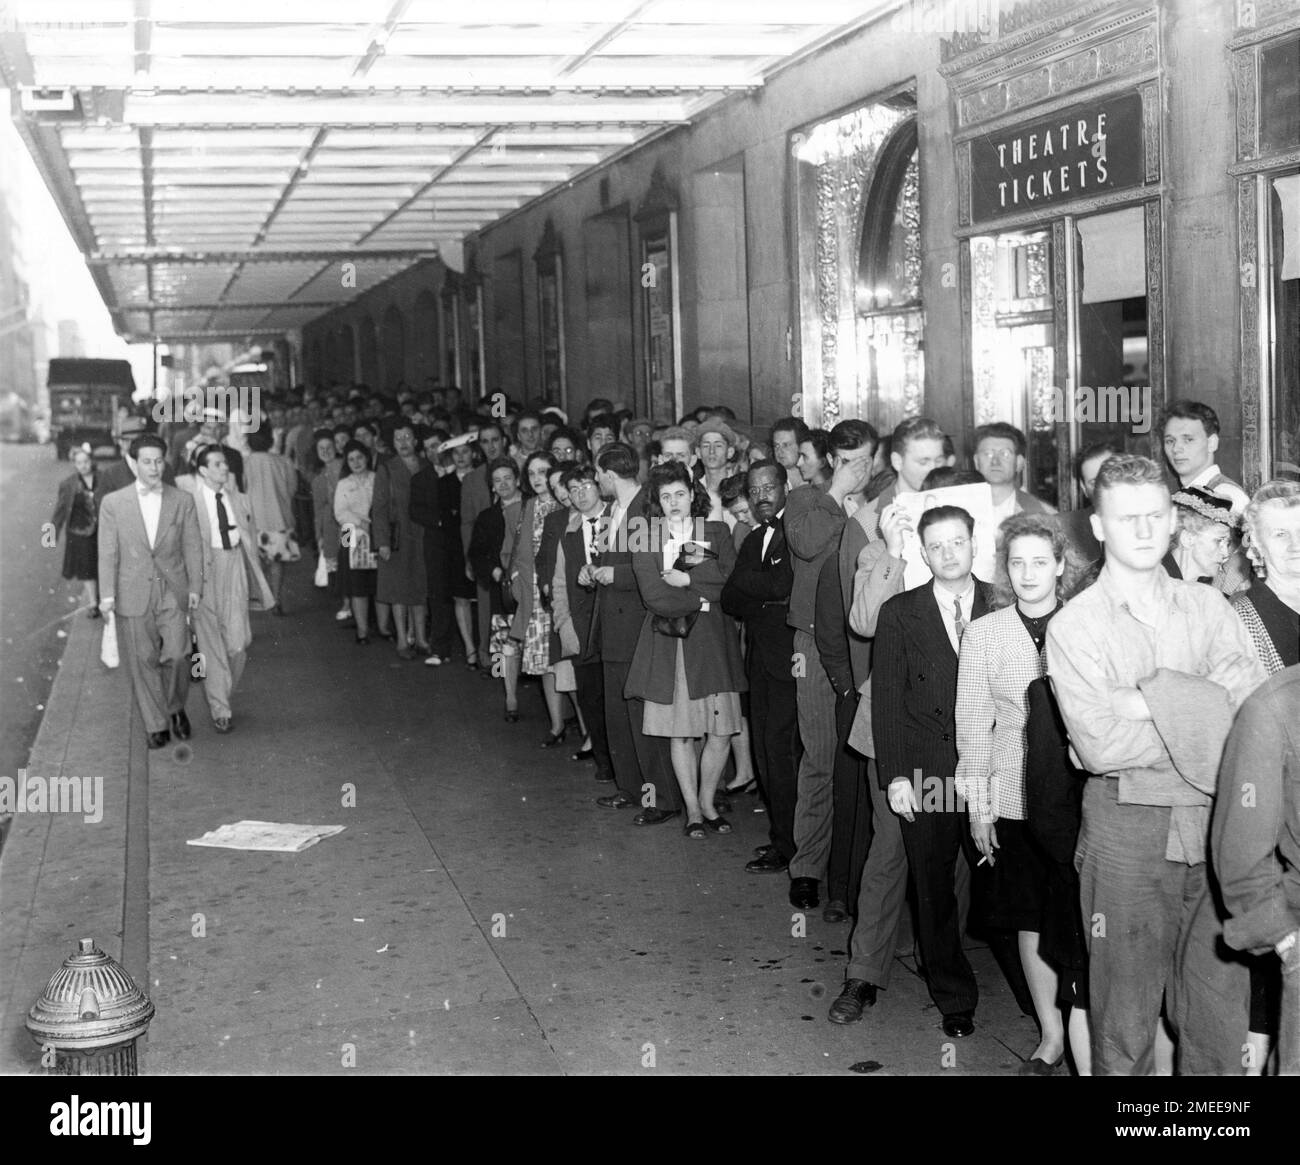 Crowd outside Paramount Movie Theatre in New York showing WILLIAM HOLDEN and JOAN CAULFIELD in DEAR RUTH 1947 director WILLIAM D. RUSSELL play Norman Krasna screenplay Arthur Sheekman Paramount Pictures with In Person Live Appearance by PERRY COMO Stock Photo